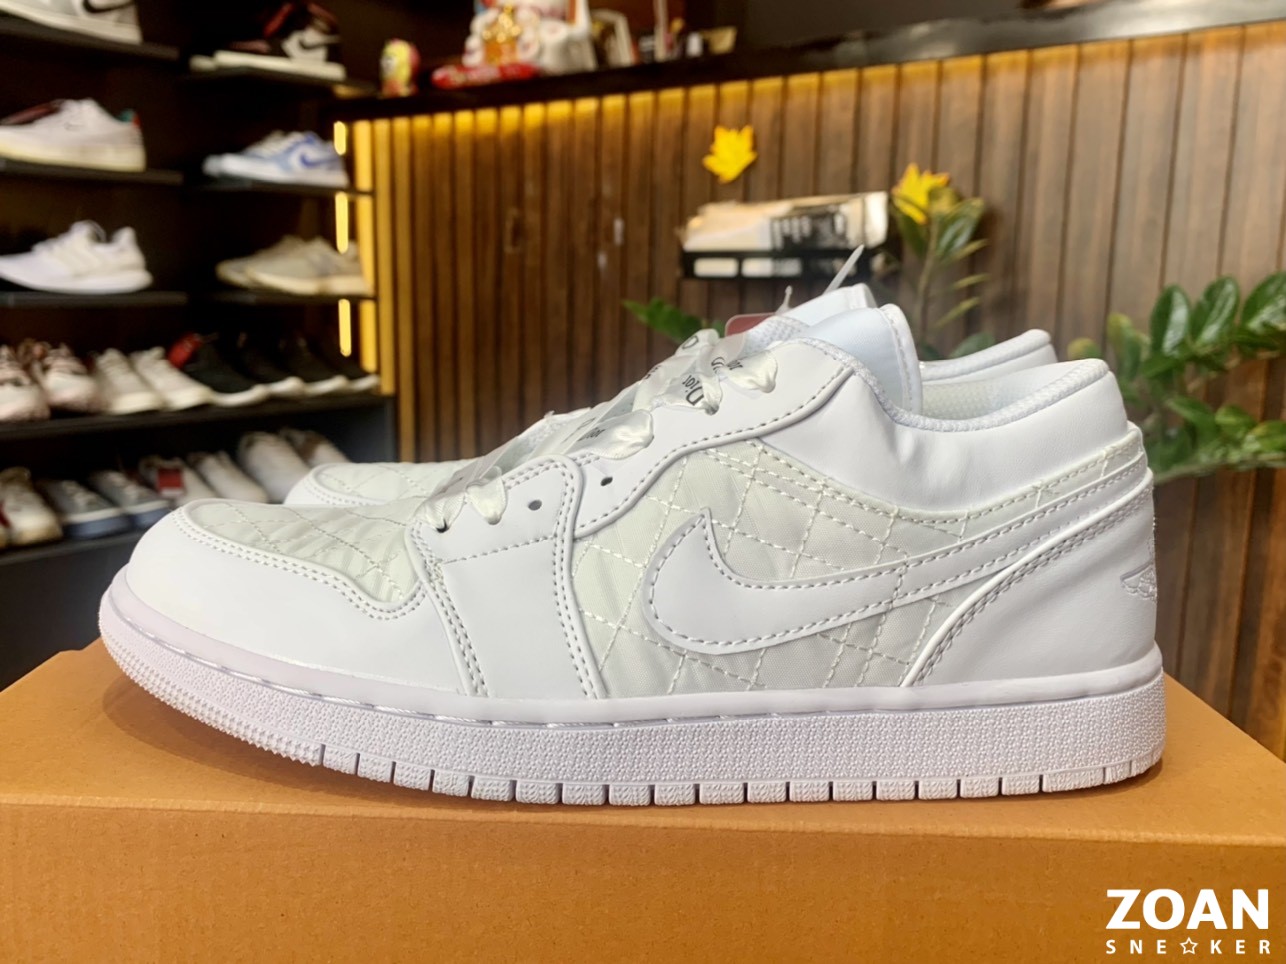 Nike Jordan 1 Low Quilted White x Dior, giày nike jordan 1 low, giày zoan, giày siêu cấp